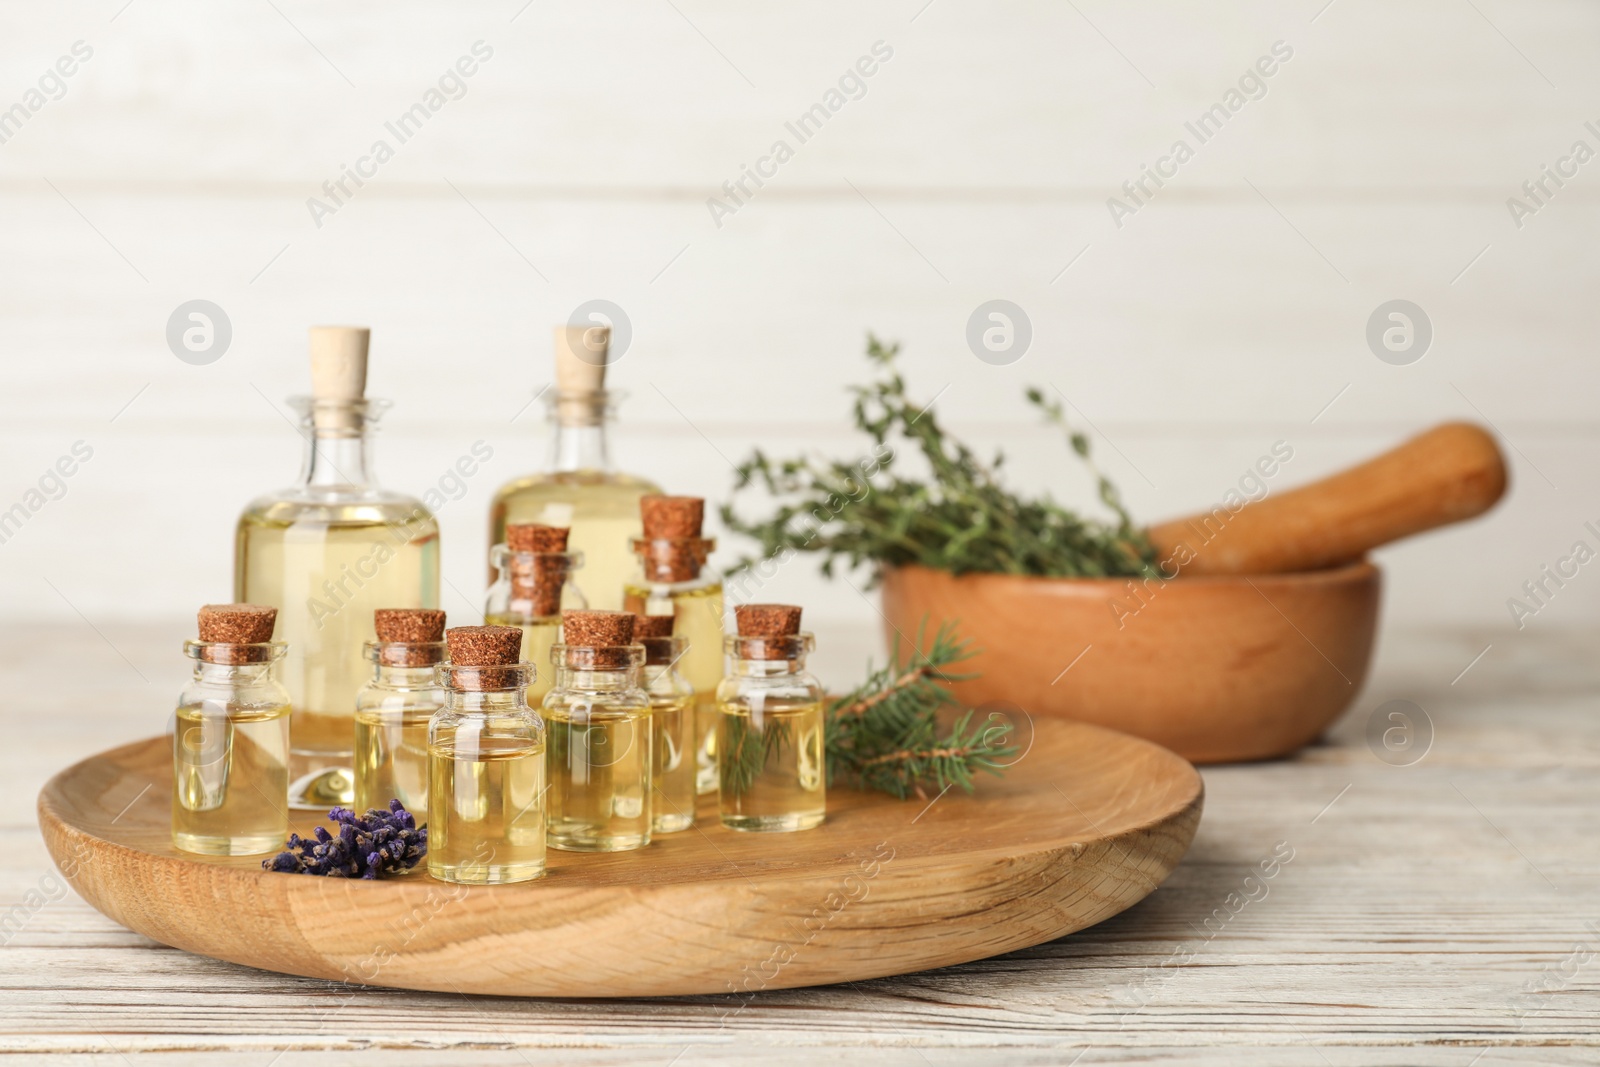 Photo of Different essential oils in glass bottles on table